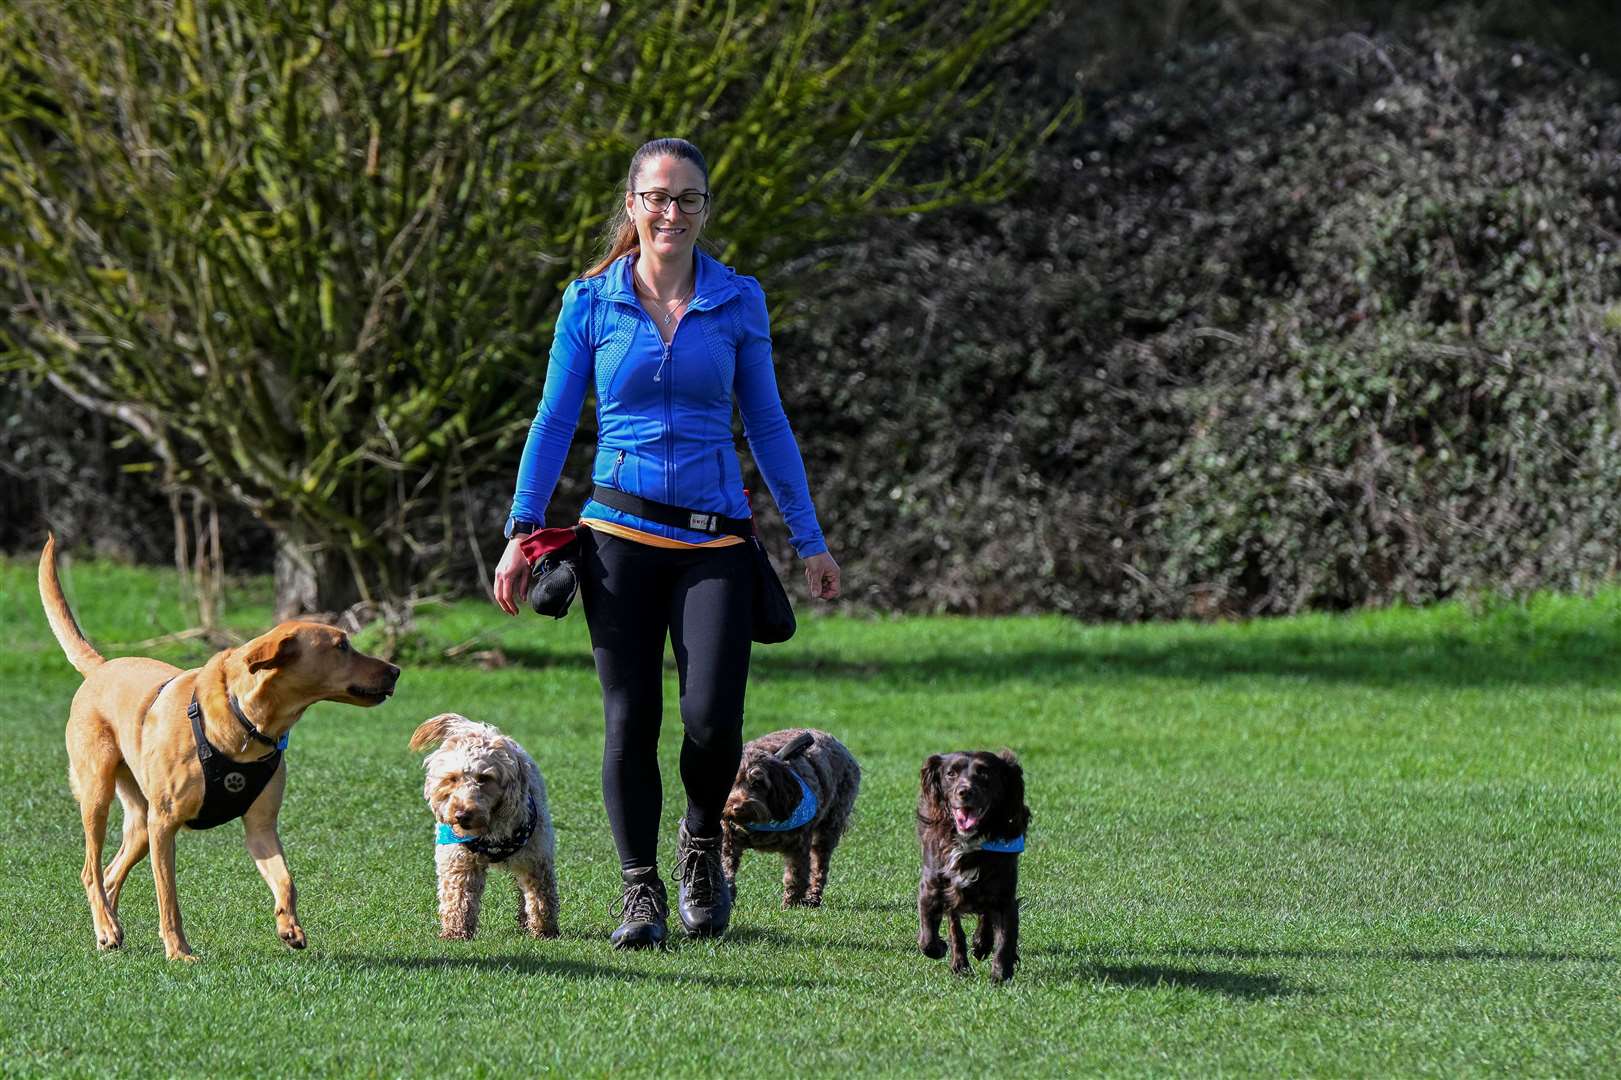 Should there be a limit on how many dogs one person can walk?